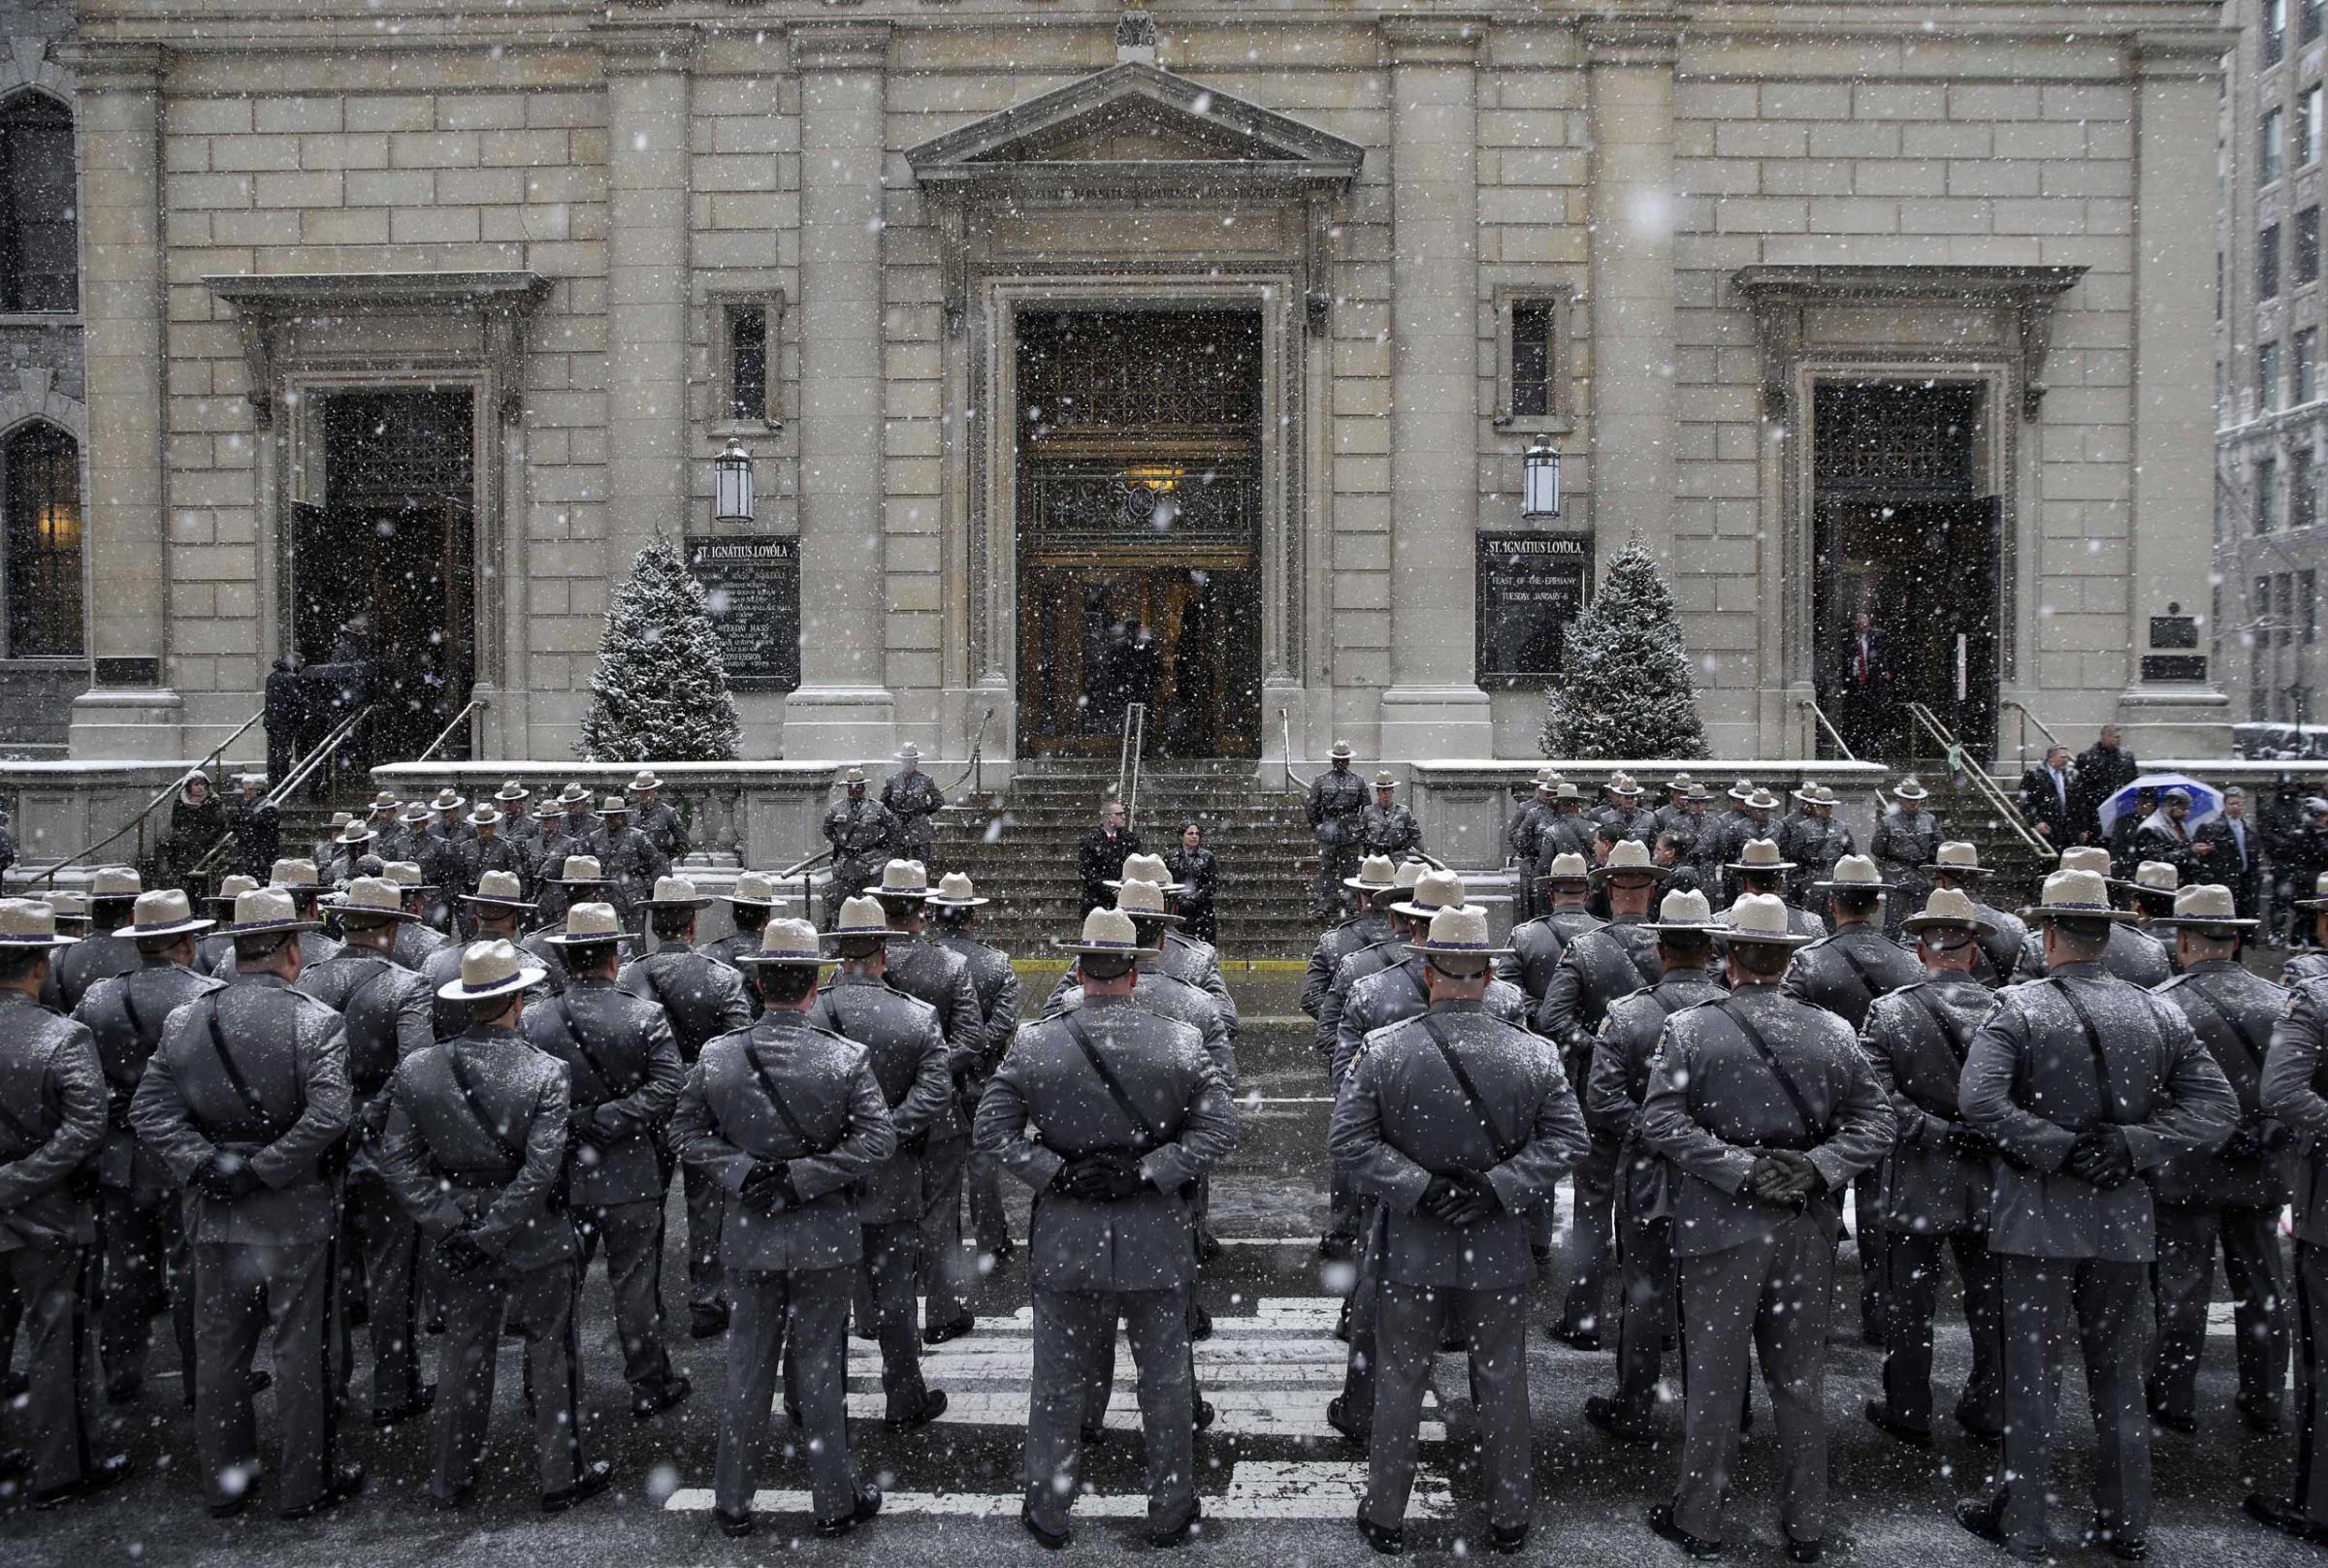 State troopers stand at attention in the snow before the funeral for former New York governor Mario Cuomo at Church of St. Ignatius Loyola in New York on Jan. 6, 2015.